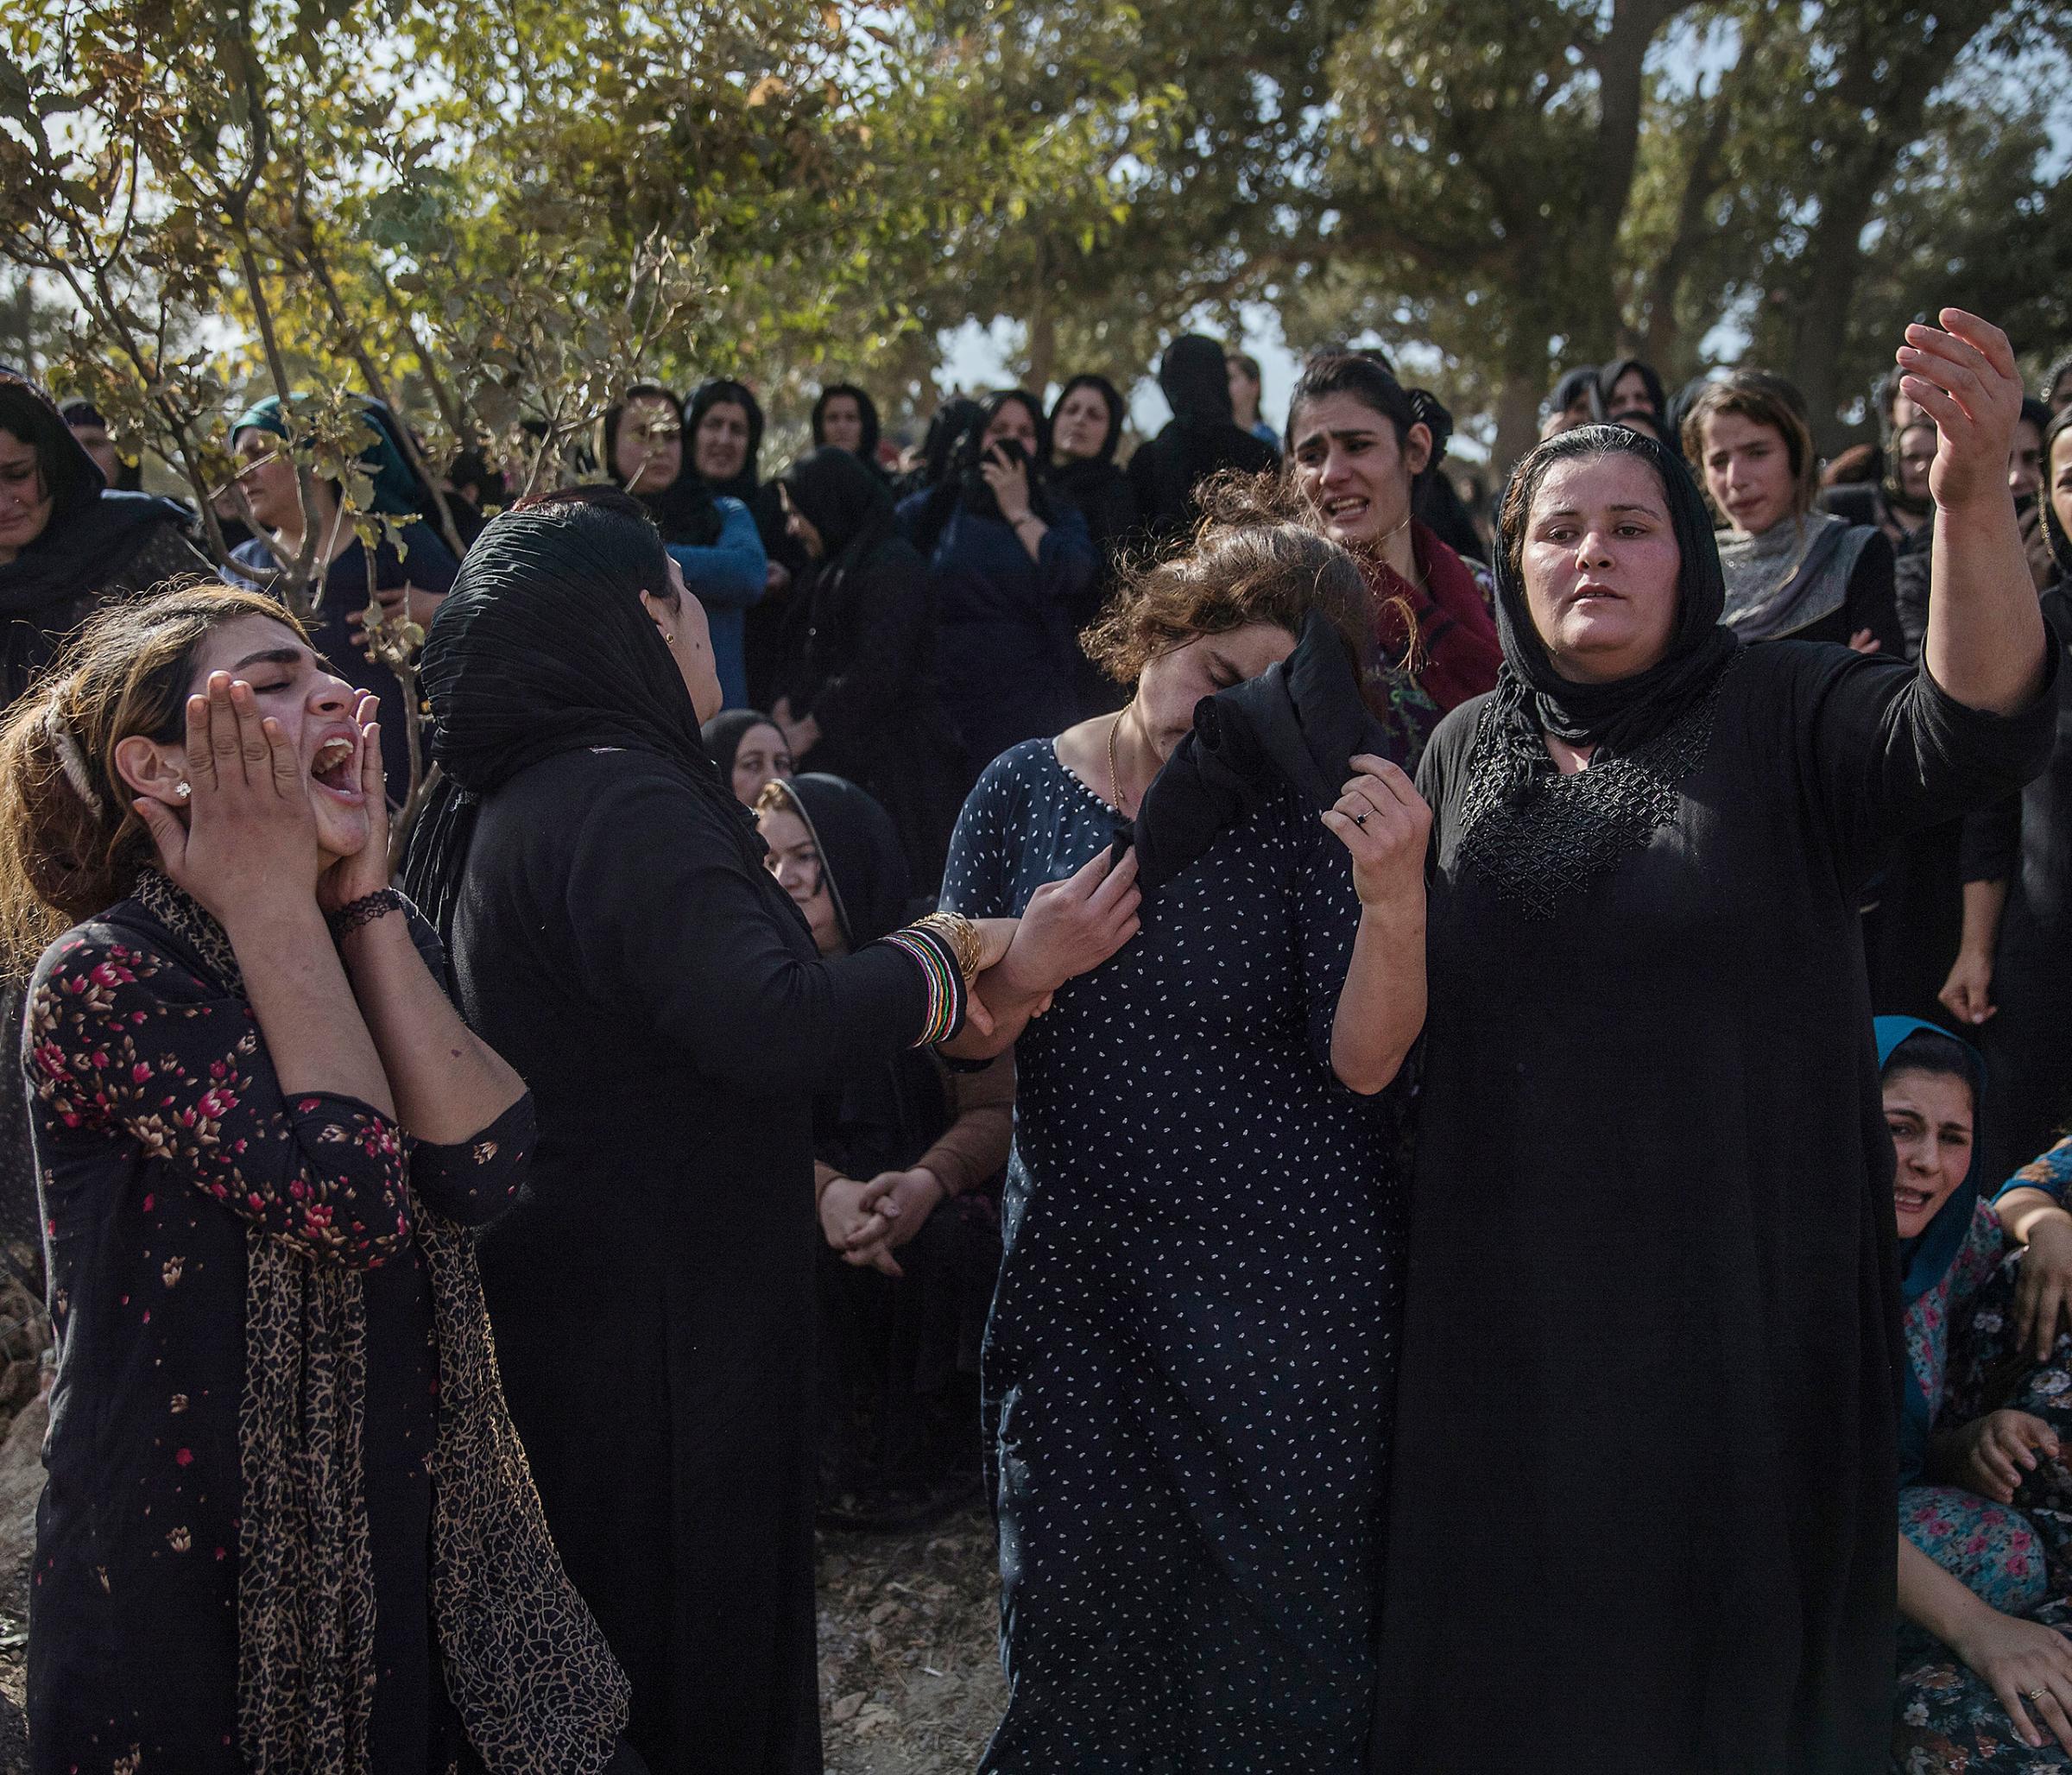 Thousands of people gather at the funeral of five Peshmerga soldiers killed by an IED explosion in their village of Khalifa, Iraq. The village has lost nearly 300 soldiers in the war against ISIS, Oct. 2016.